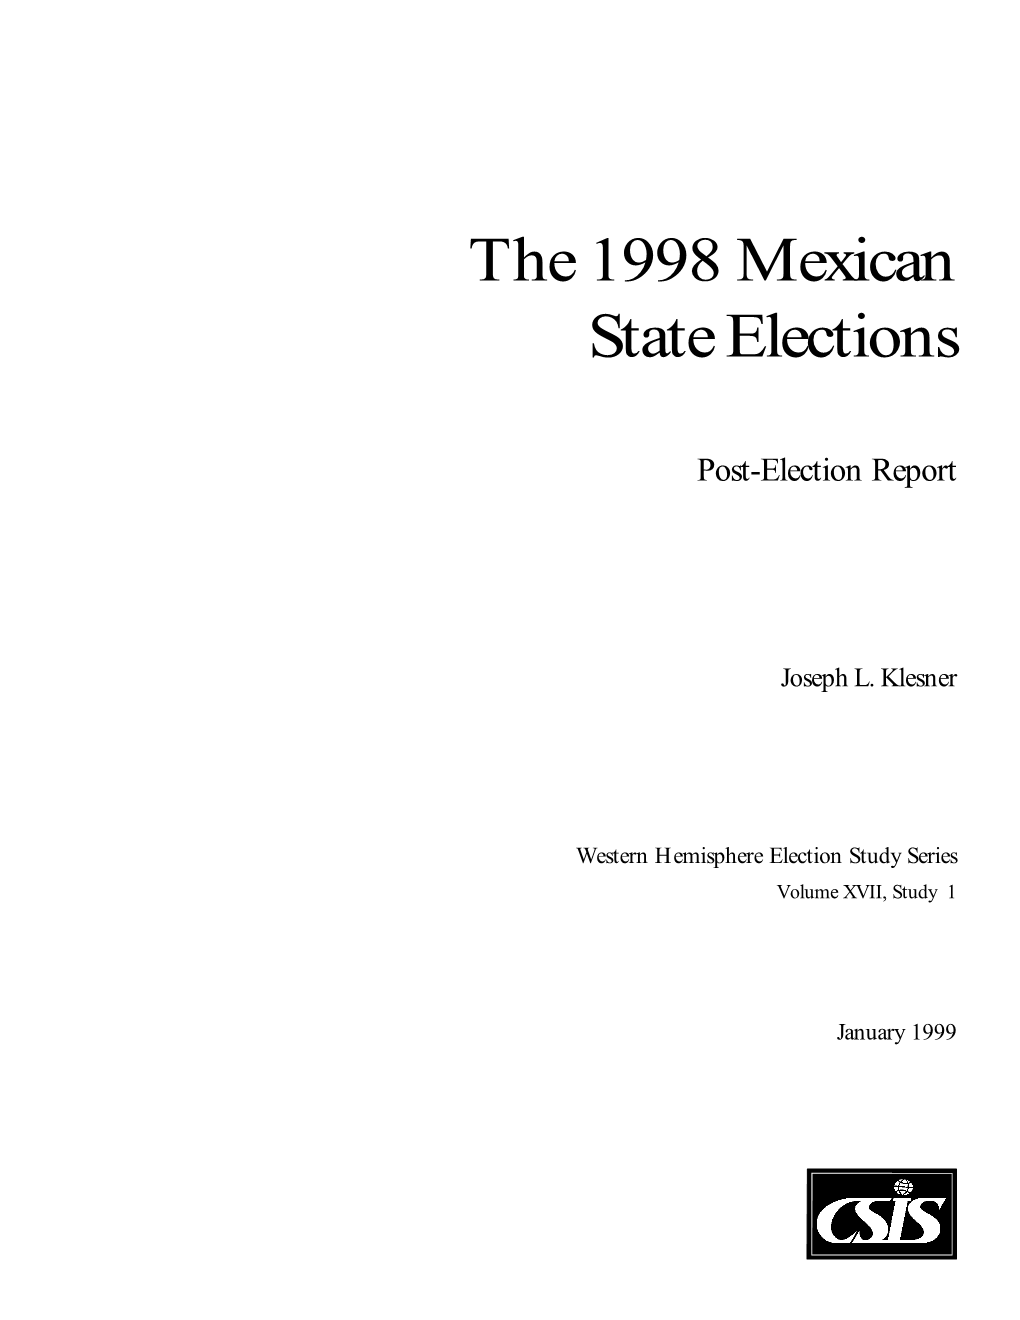 The 1998 Mexican State Elections